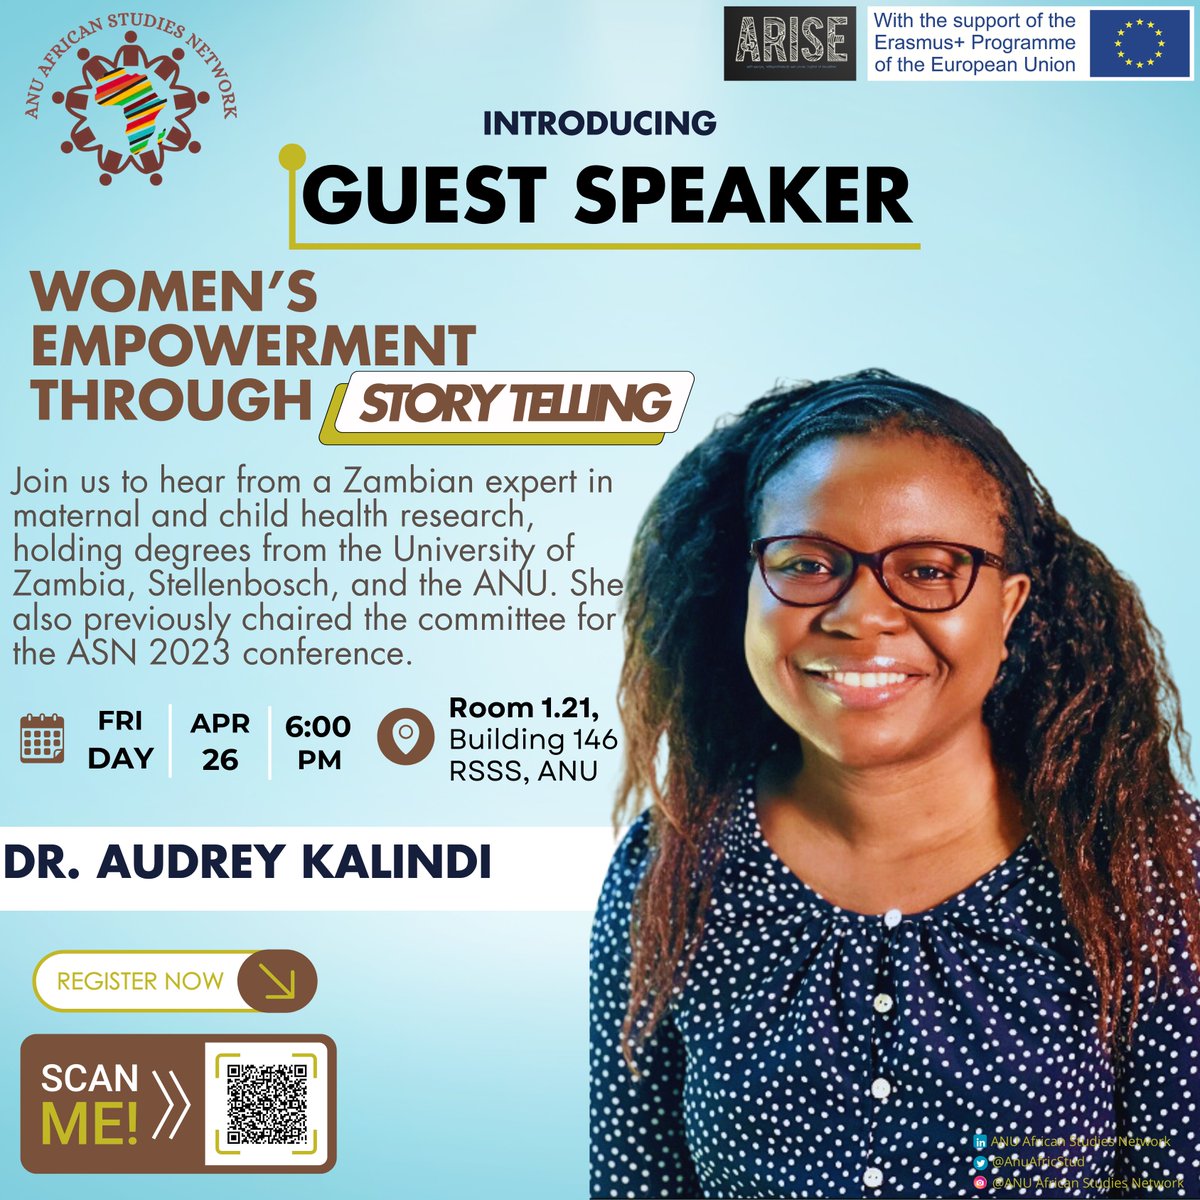 Our fourth panellist is @audreykalindi , a maternal and child health expert from Zambia. Audrey recently got her PhD from the ANU. Last year, Audrey chaired the committee for the ASN 2023 conference. She is currently residing and working in Australia.
#ANU
#Africa
#WomensWorlds